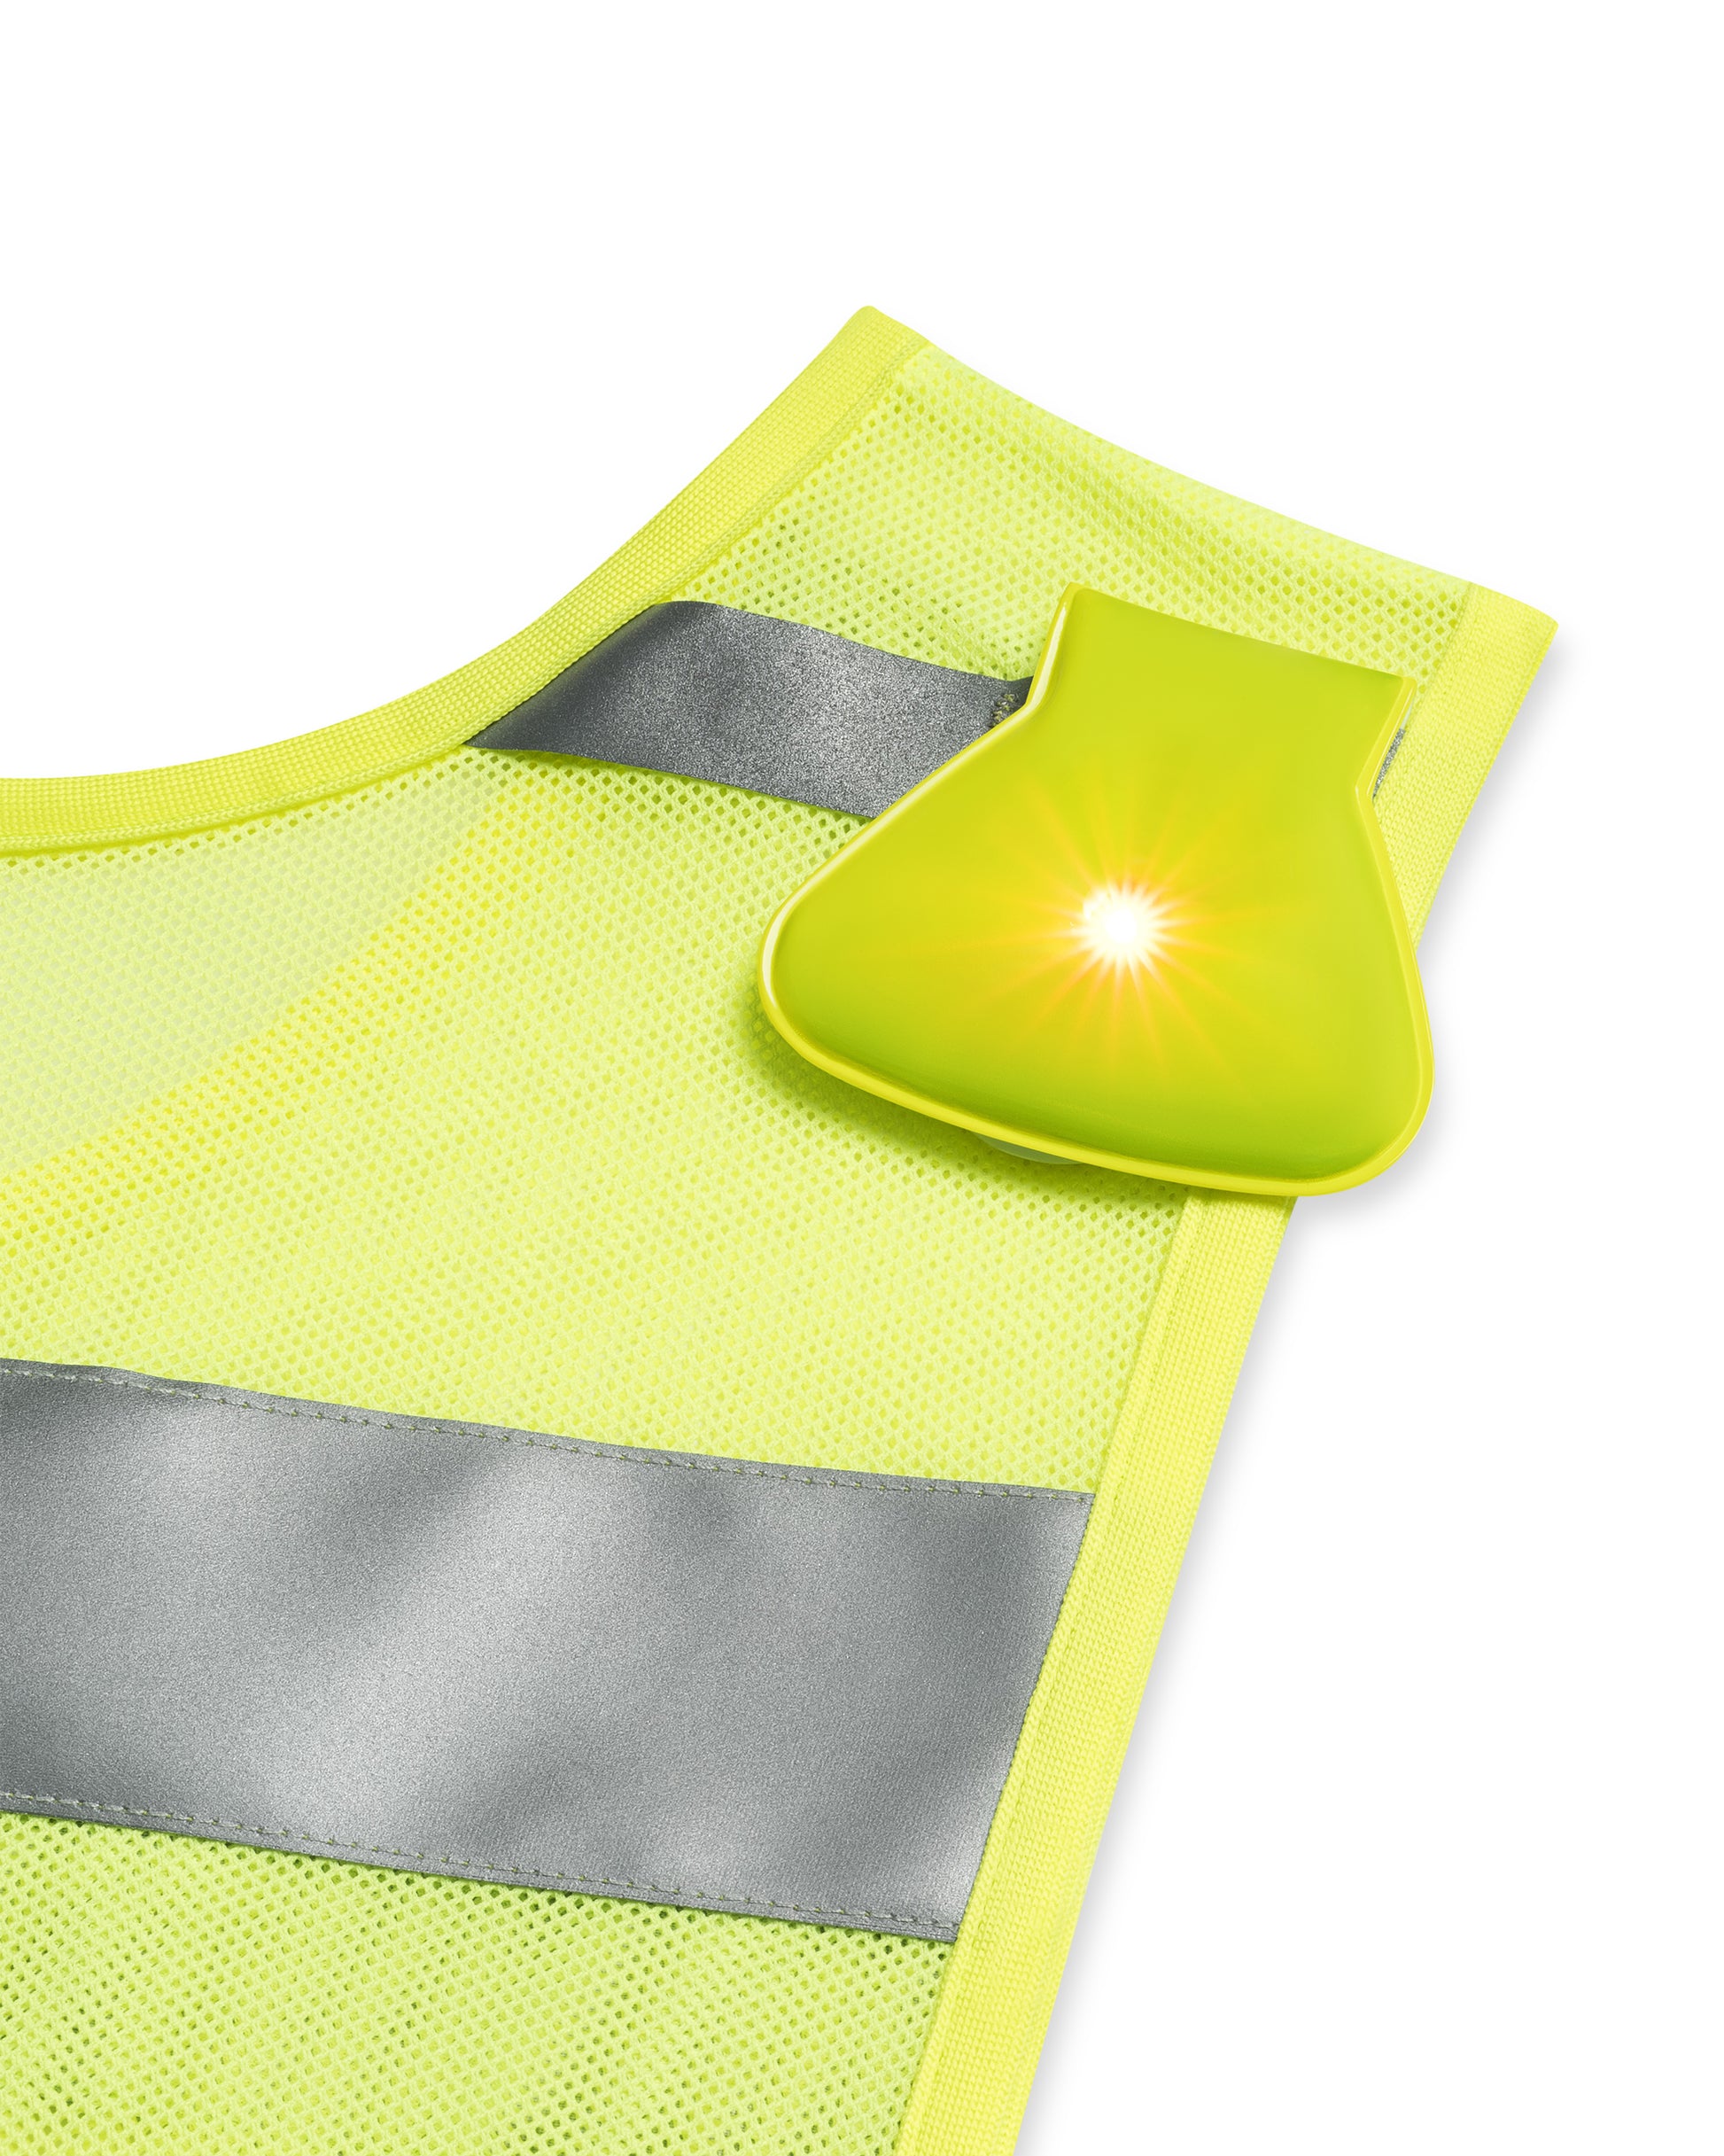 The Reflective Safety Vest is made in New York City with 360-degree 3M™  Scotchlite™ reflectivity and a featherweight breathable wide mesh…